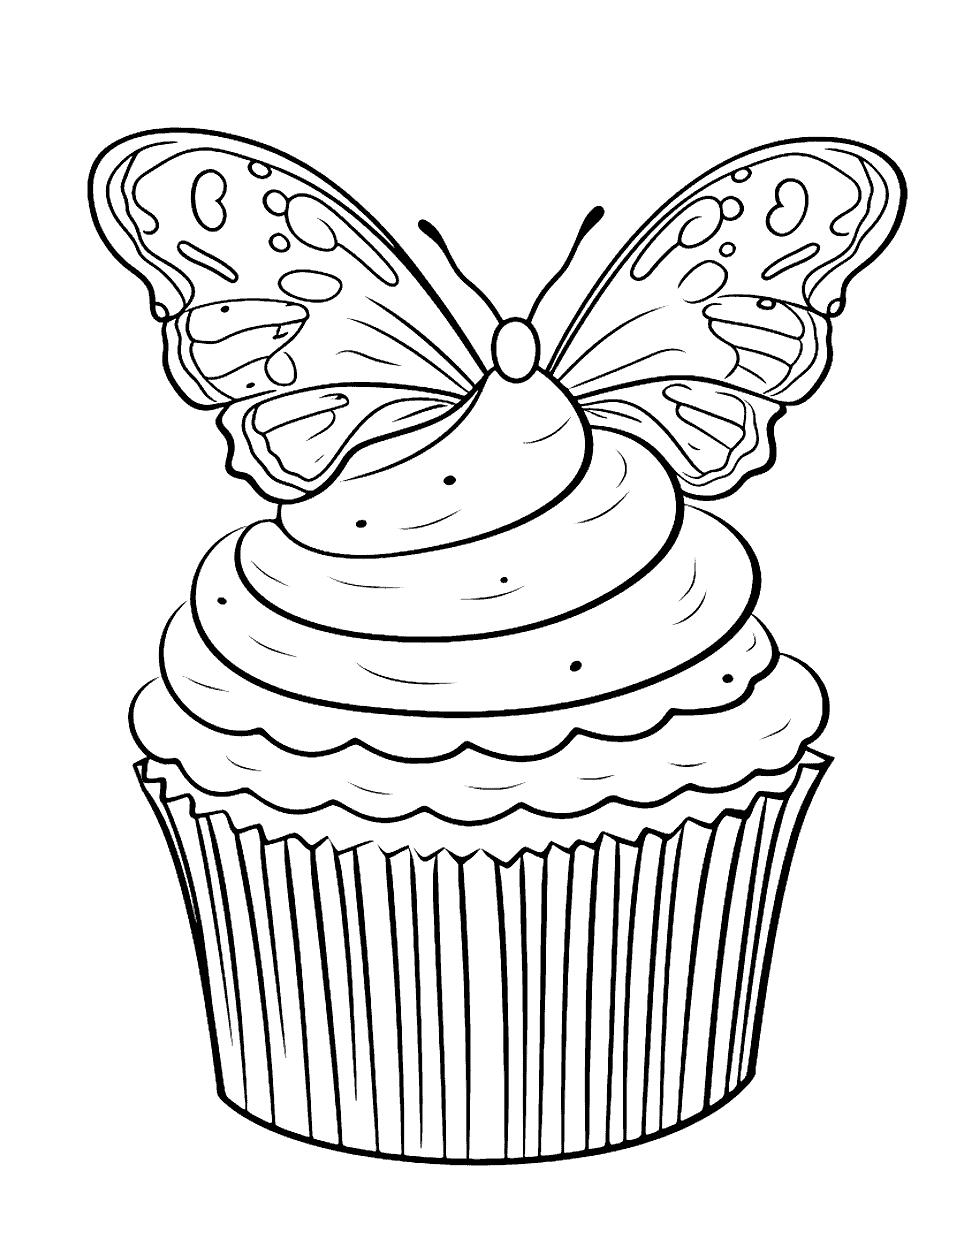 Butterfly Cupcake Coloring Page - A delicate butterfly designed unique cupcake.